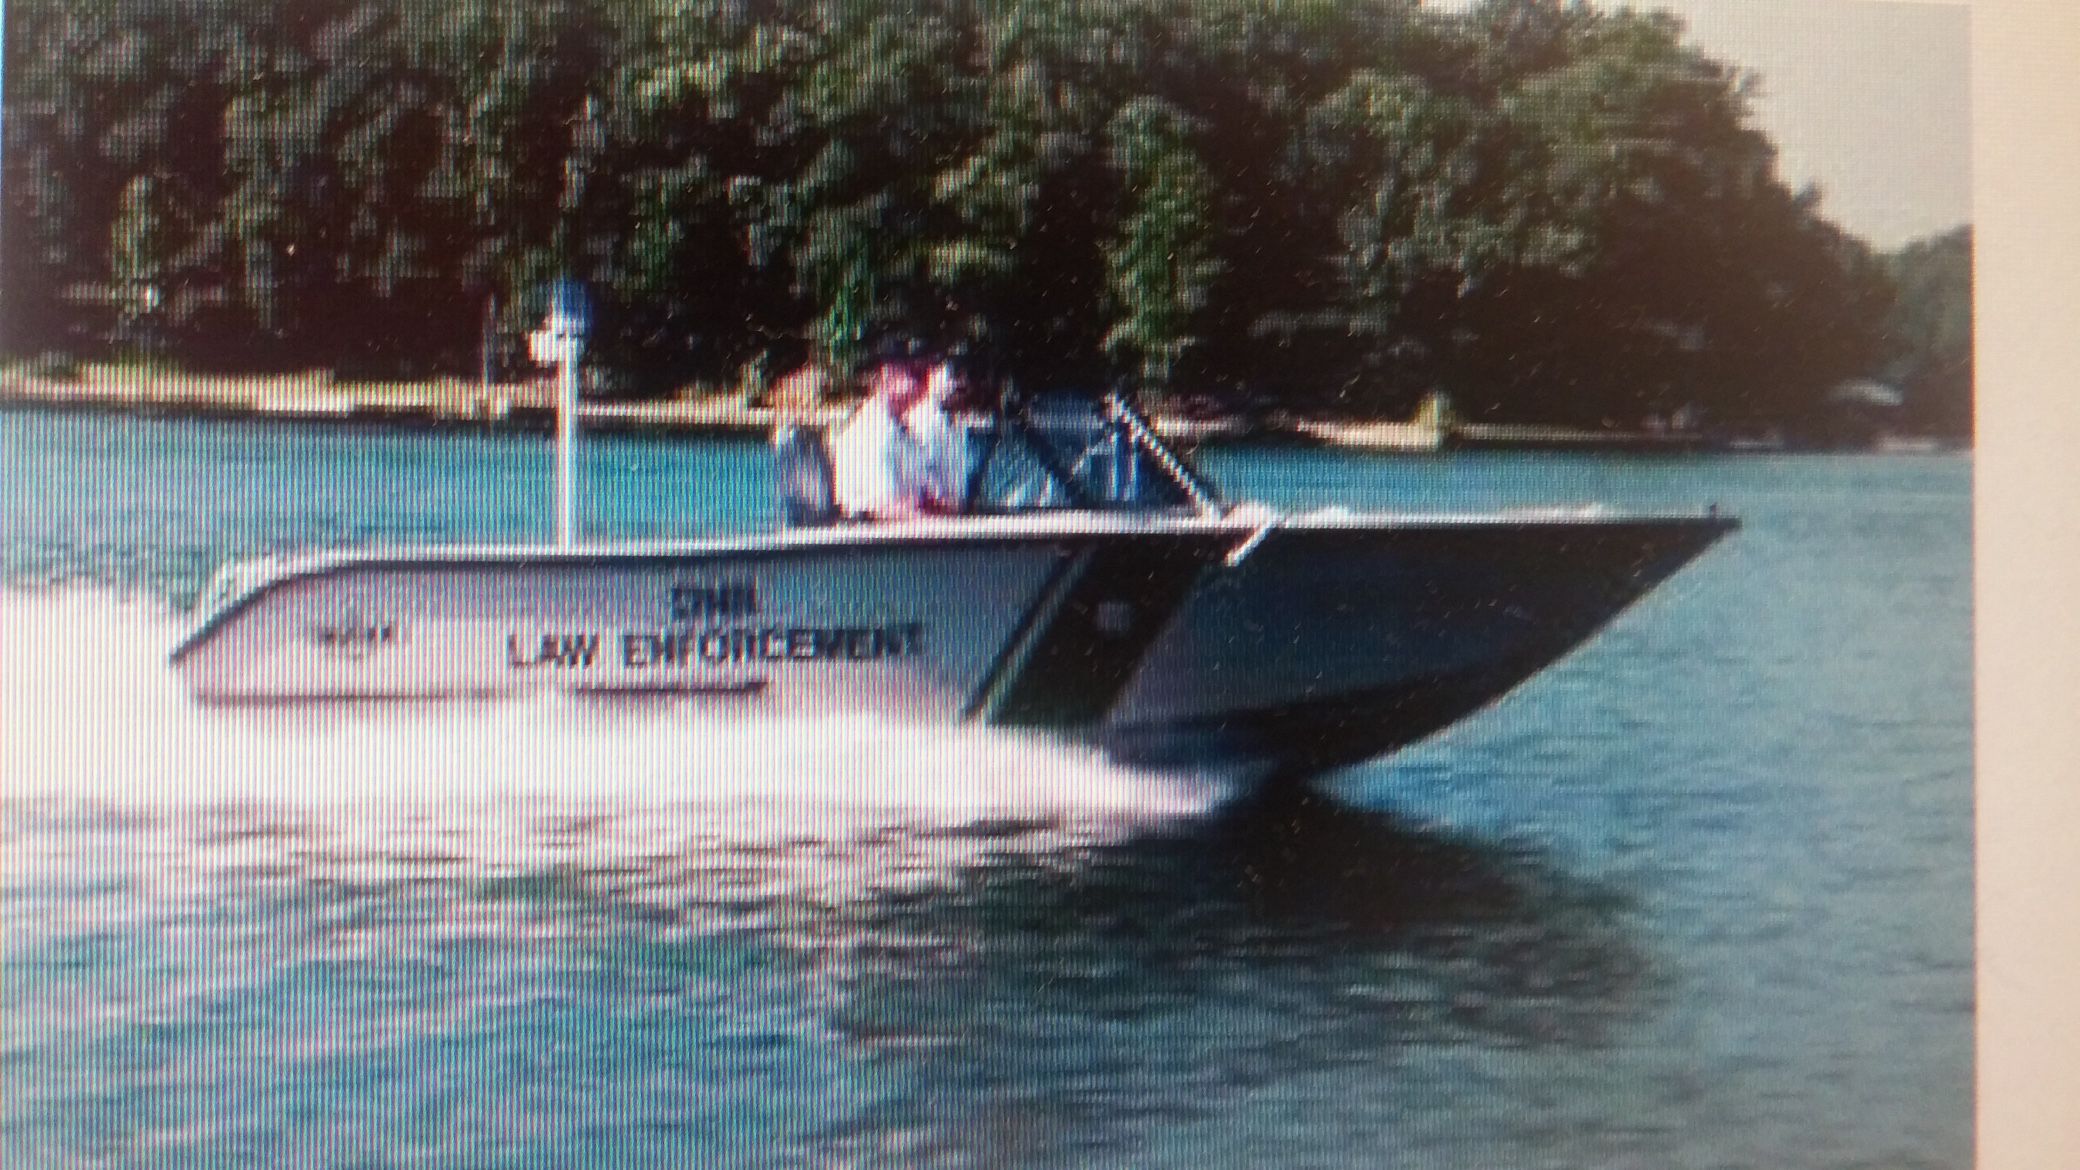 1997 MCKEE CRAFT PULSE WT UNSINKABLE POLICE BOAT. 